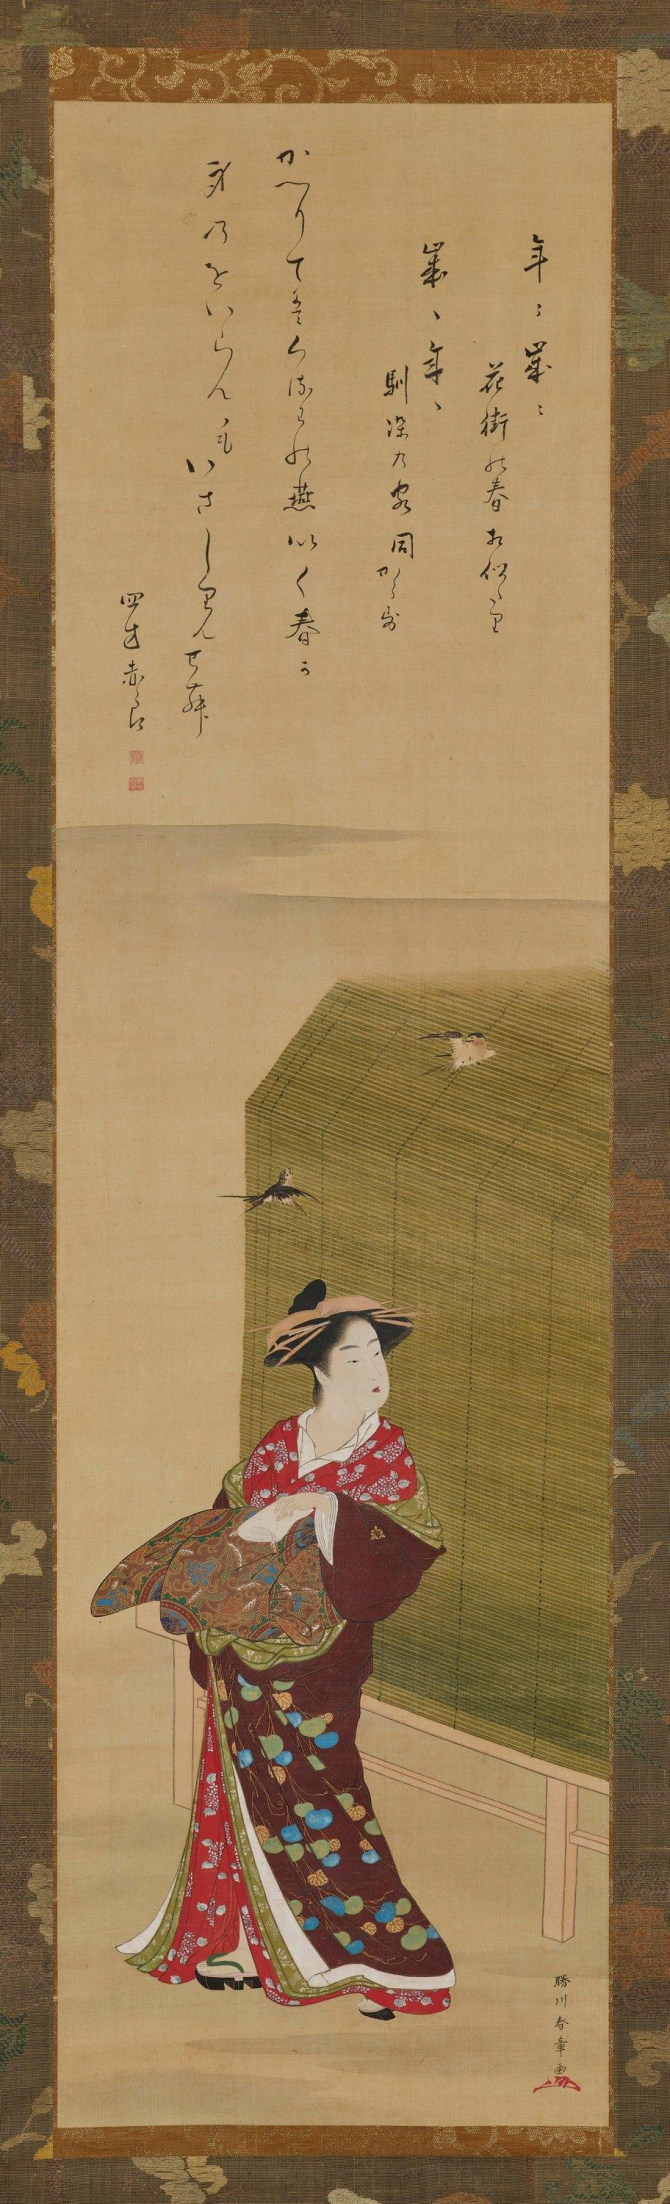 Image of "Courtesan and Swallows"